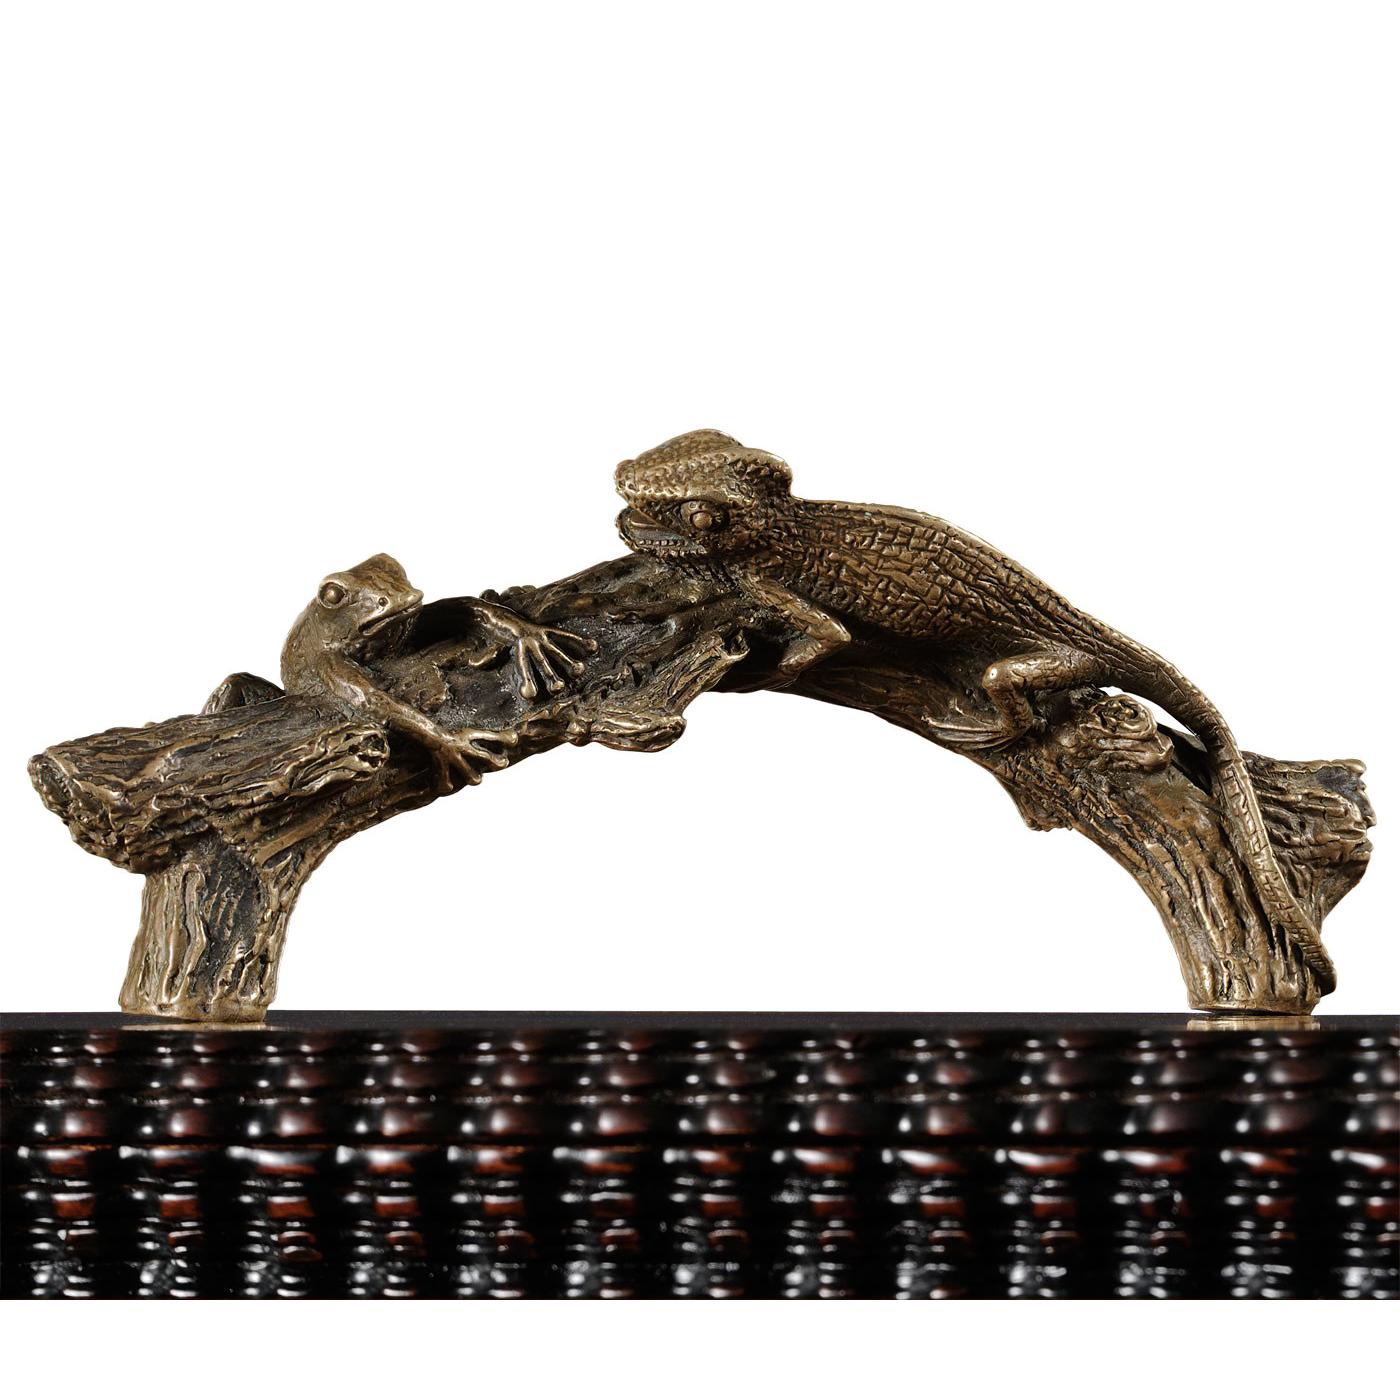 Decorative walnut and burl walnut veneered lidded box with heavily gadrooned mouldings and distressed finish. Finely cast brass handle naturalistically depicting a frog and chameleon on a branch.

Dimensions: 13.5